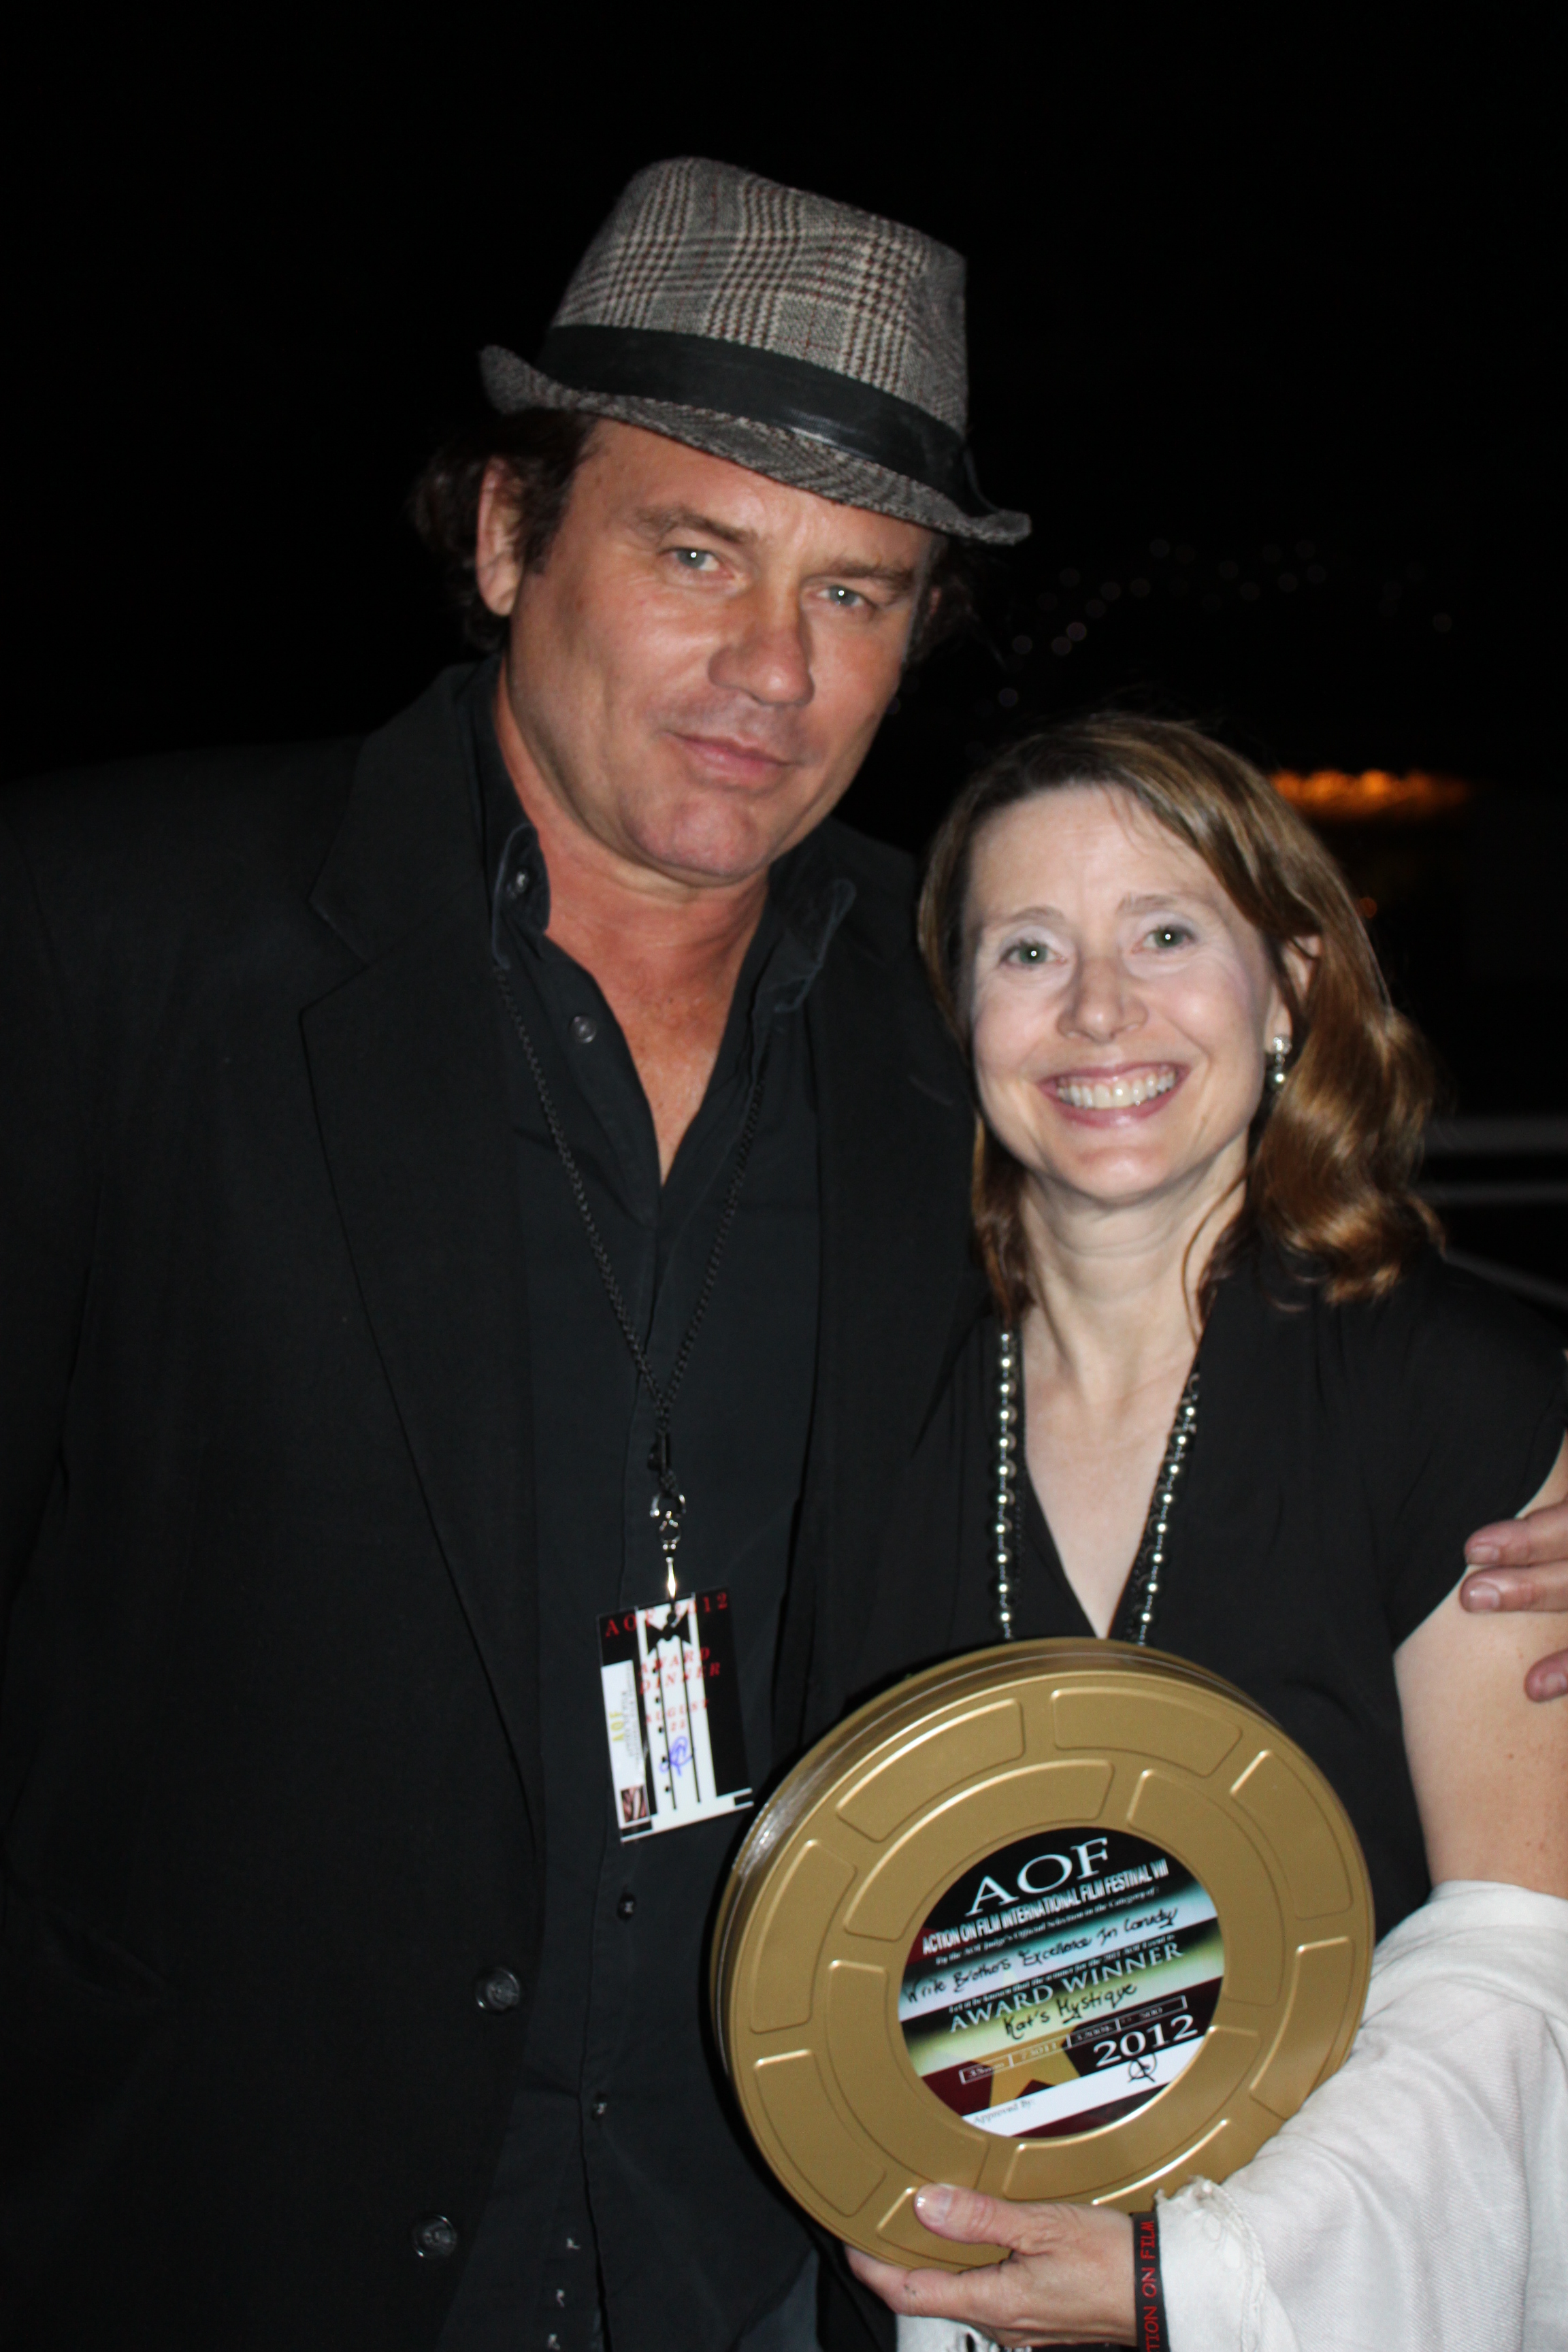 Colleen with Richard Tyson at the AOF Black Tie Event. Colleen won the 